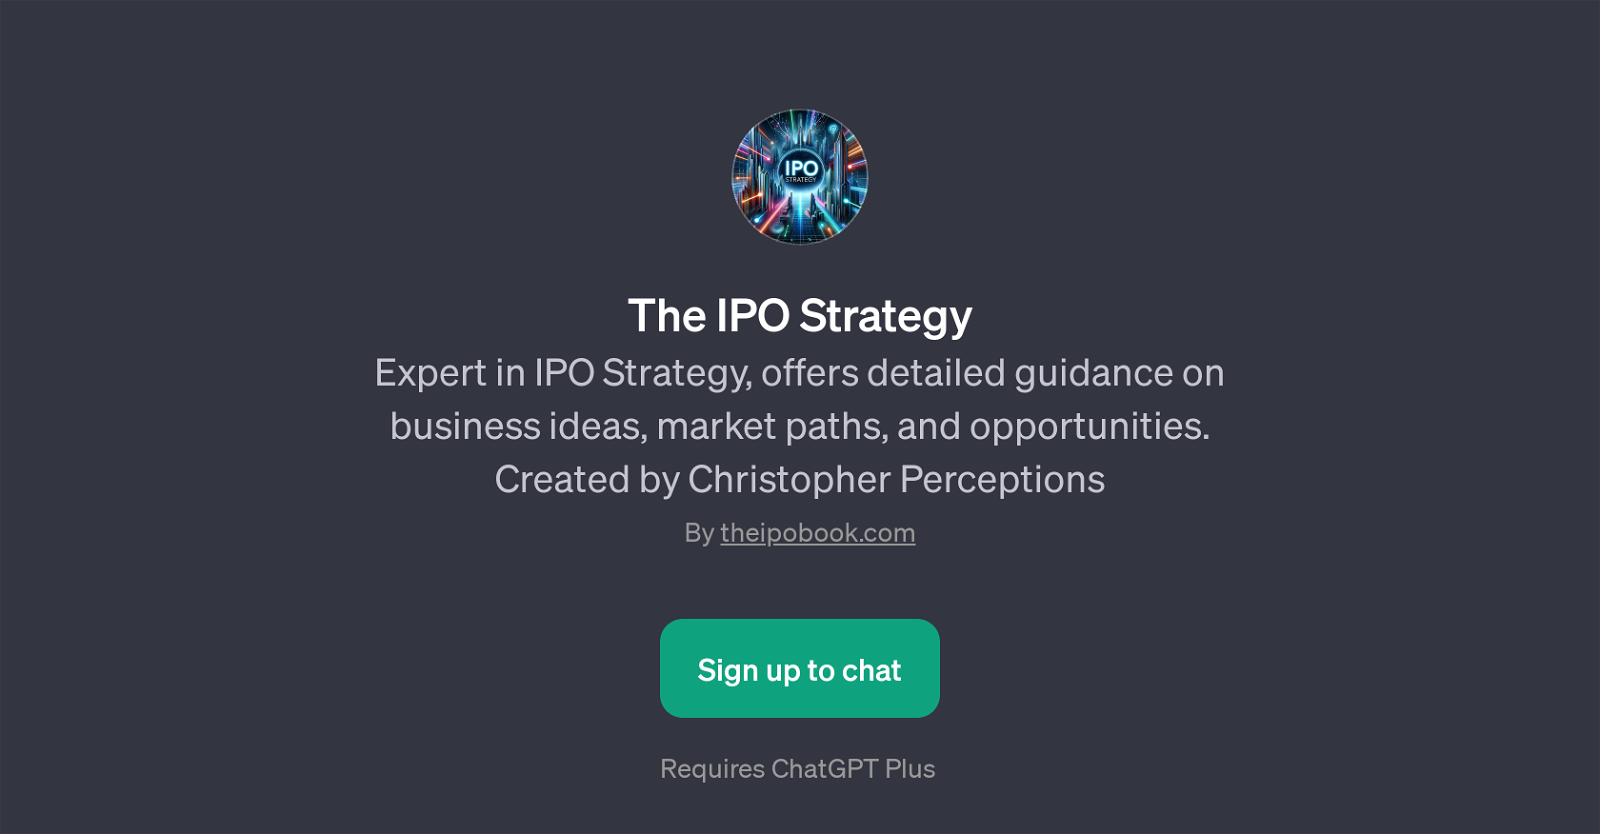 The IPO Strategy website